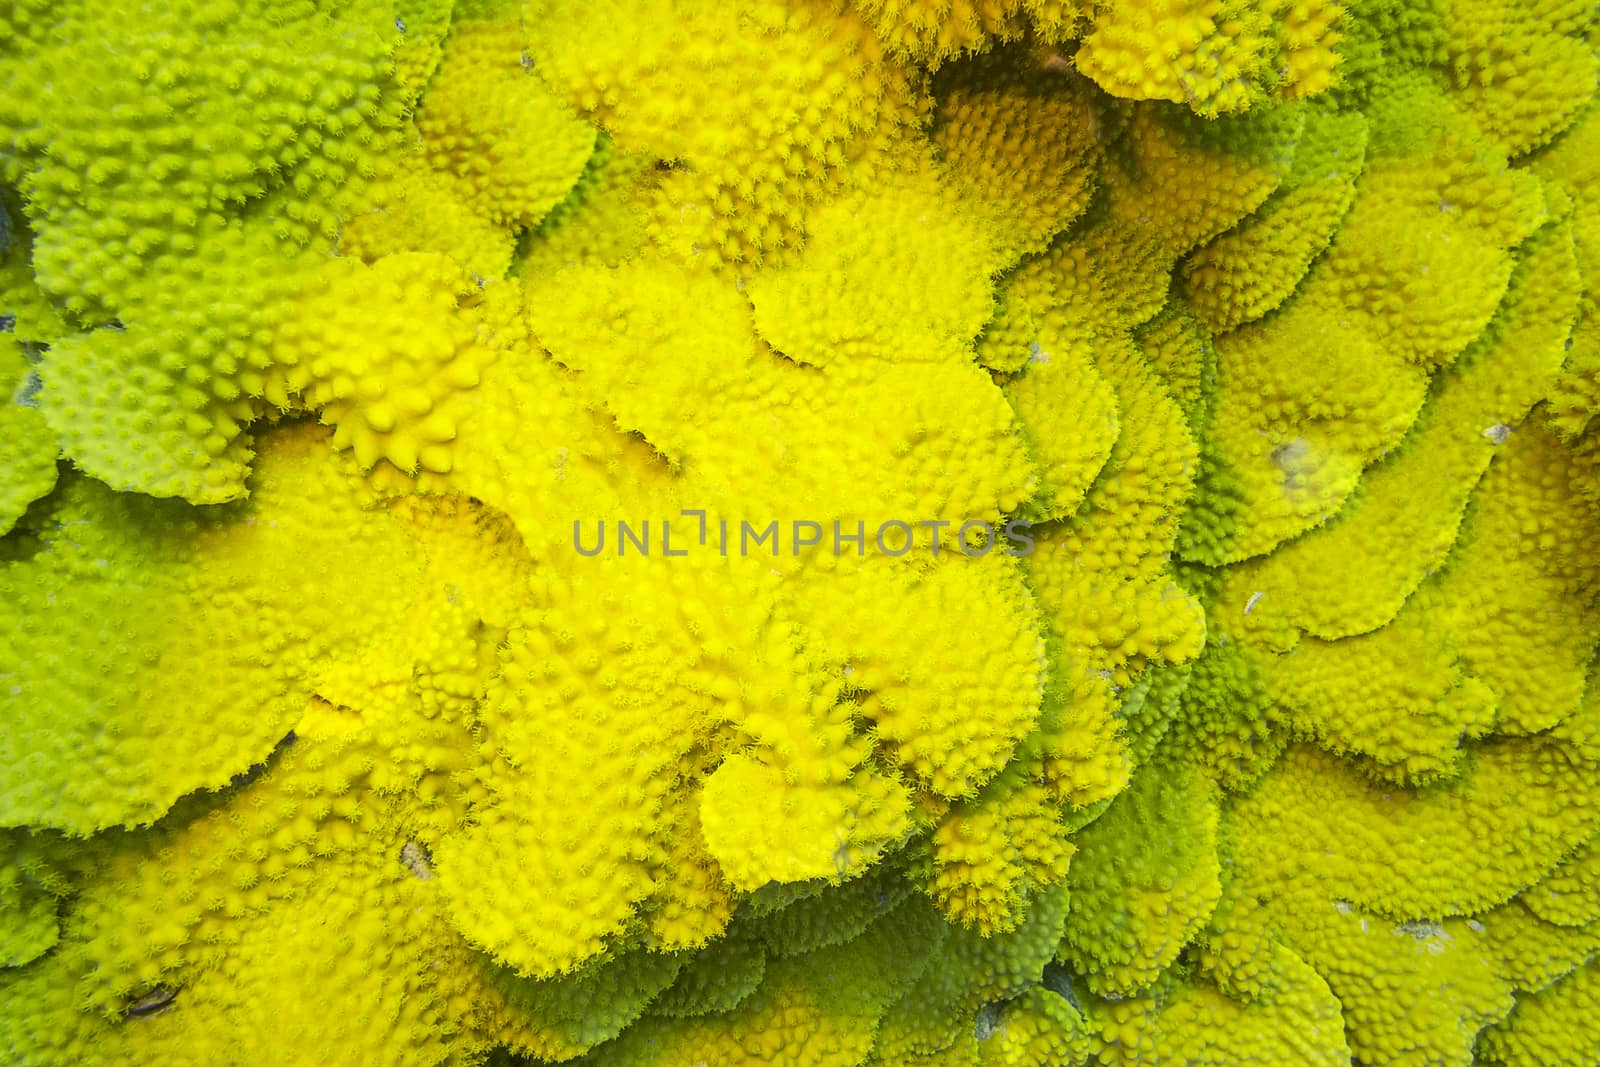 Coral reef with yellow coral turbinaria mesenterina at the bottom of tropical sea, underwater